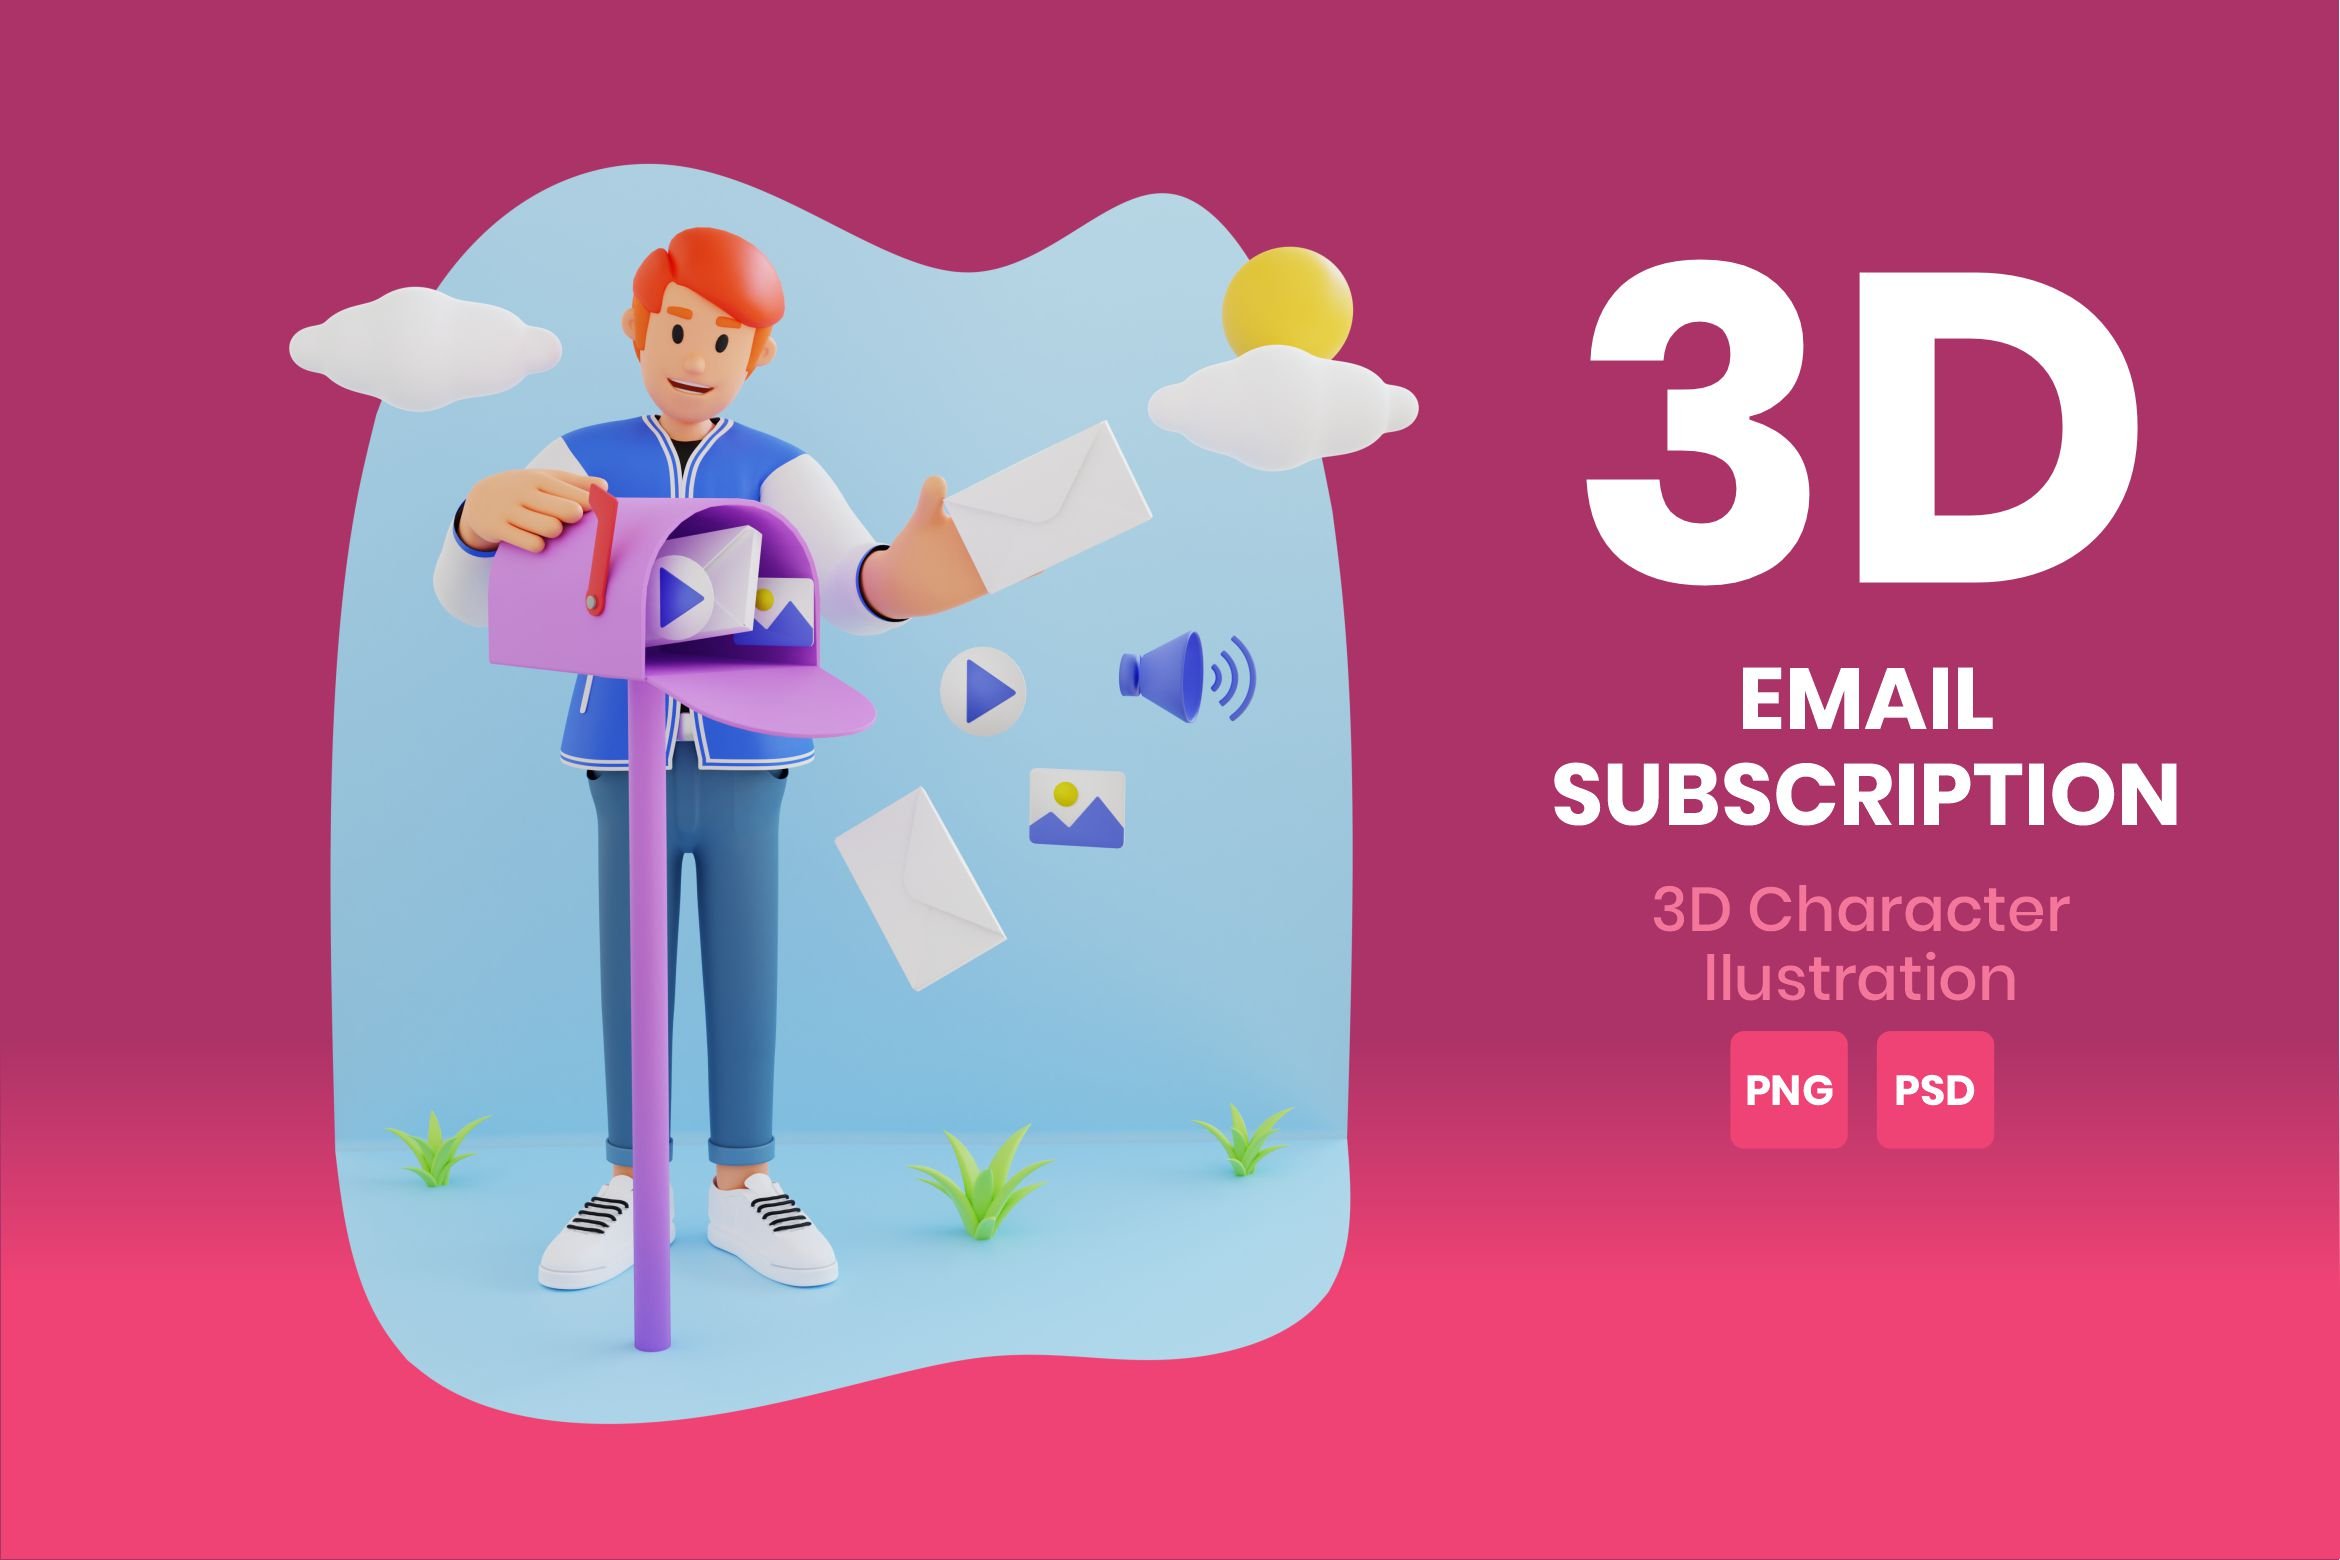 Email Subscription 3d Character cover image.